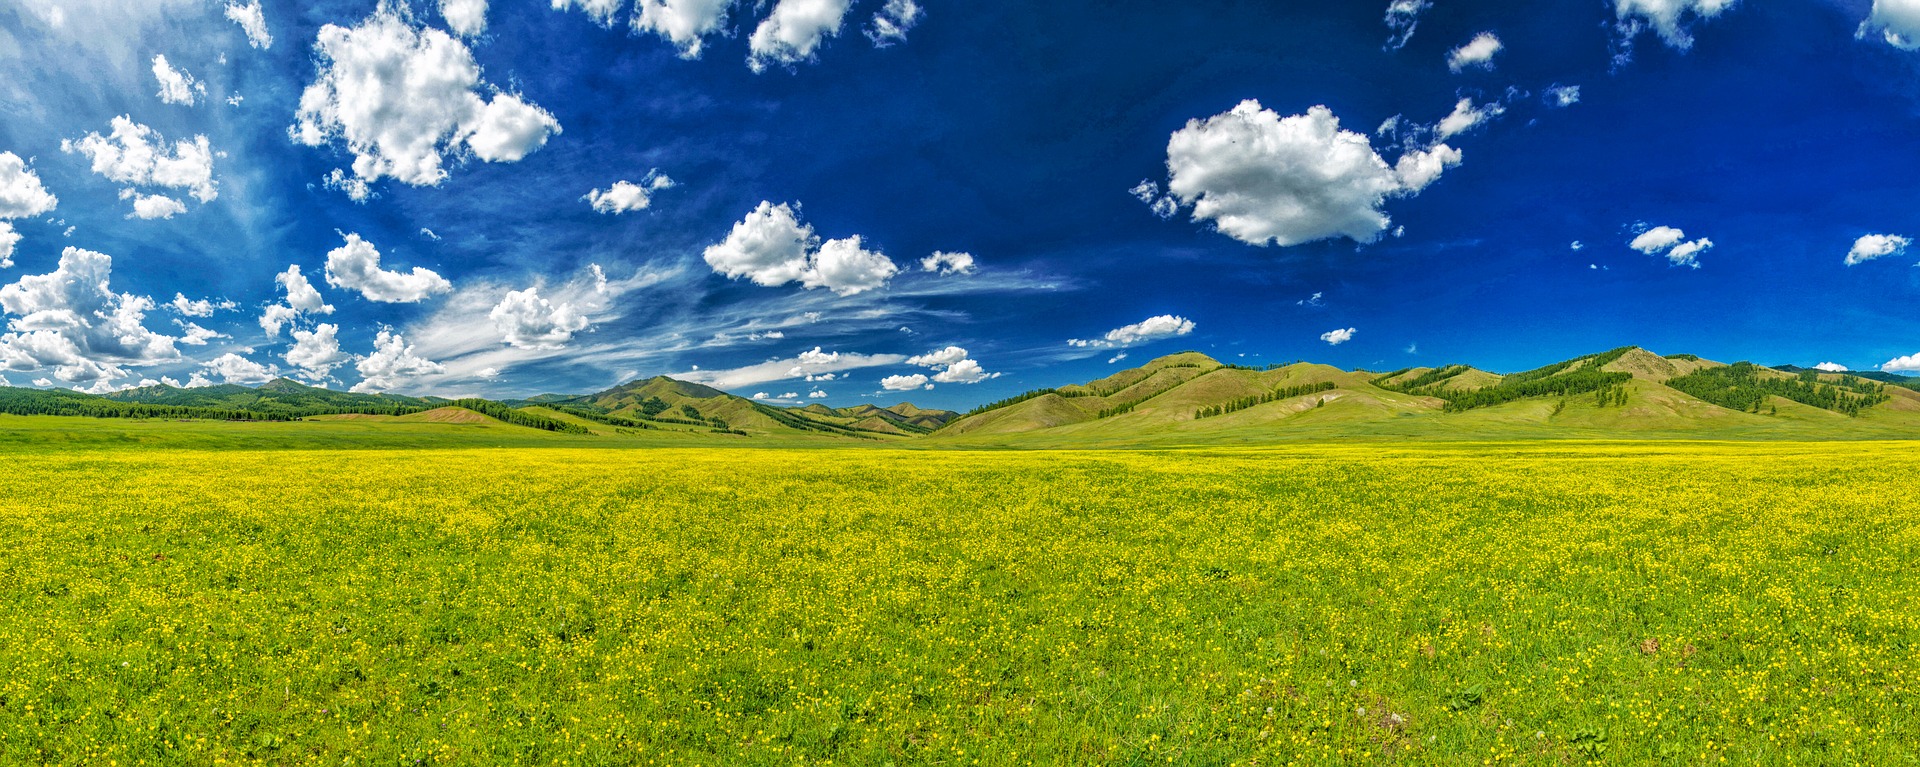 Nature of the central part of Mongolia